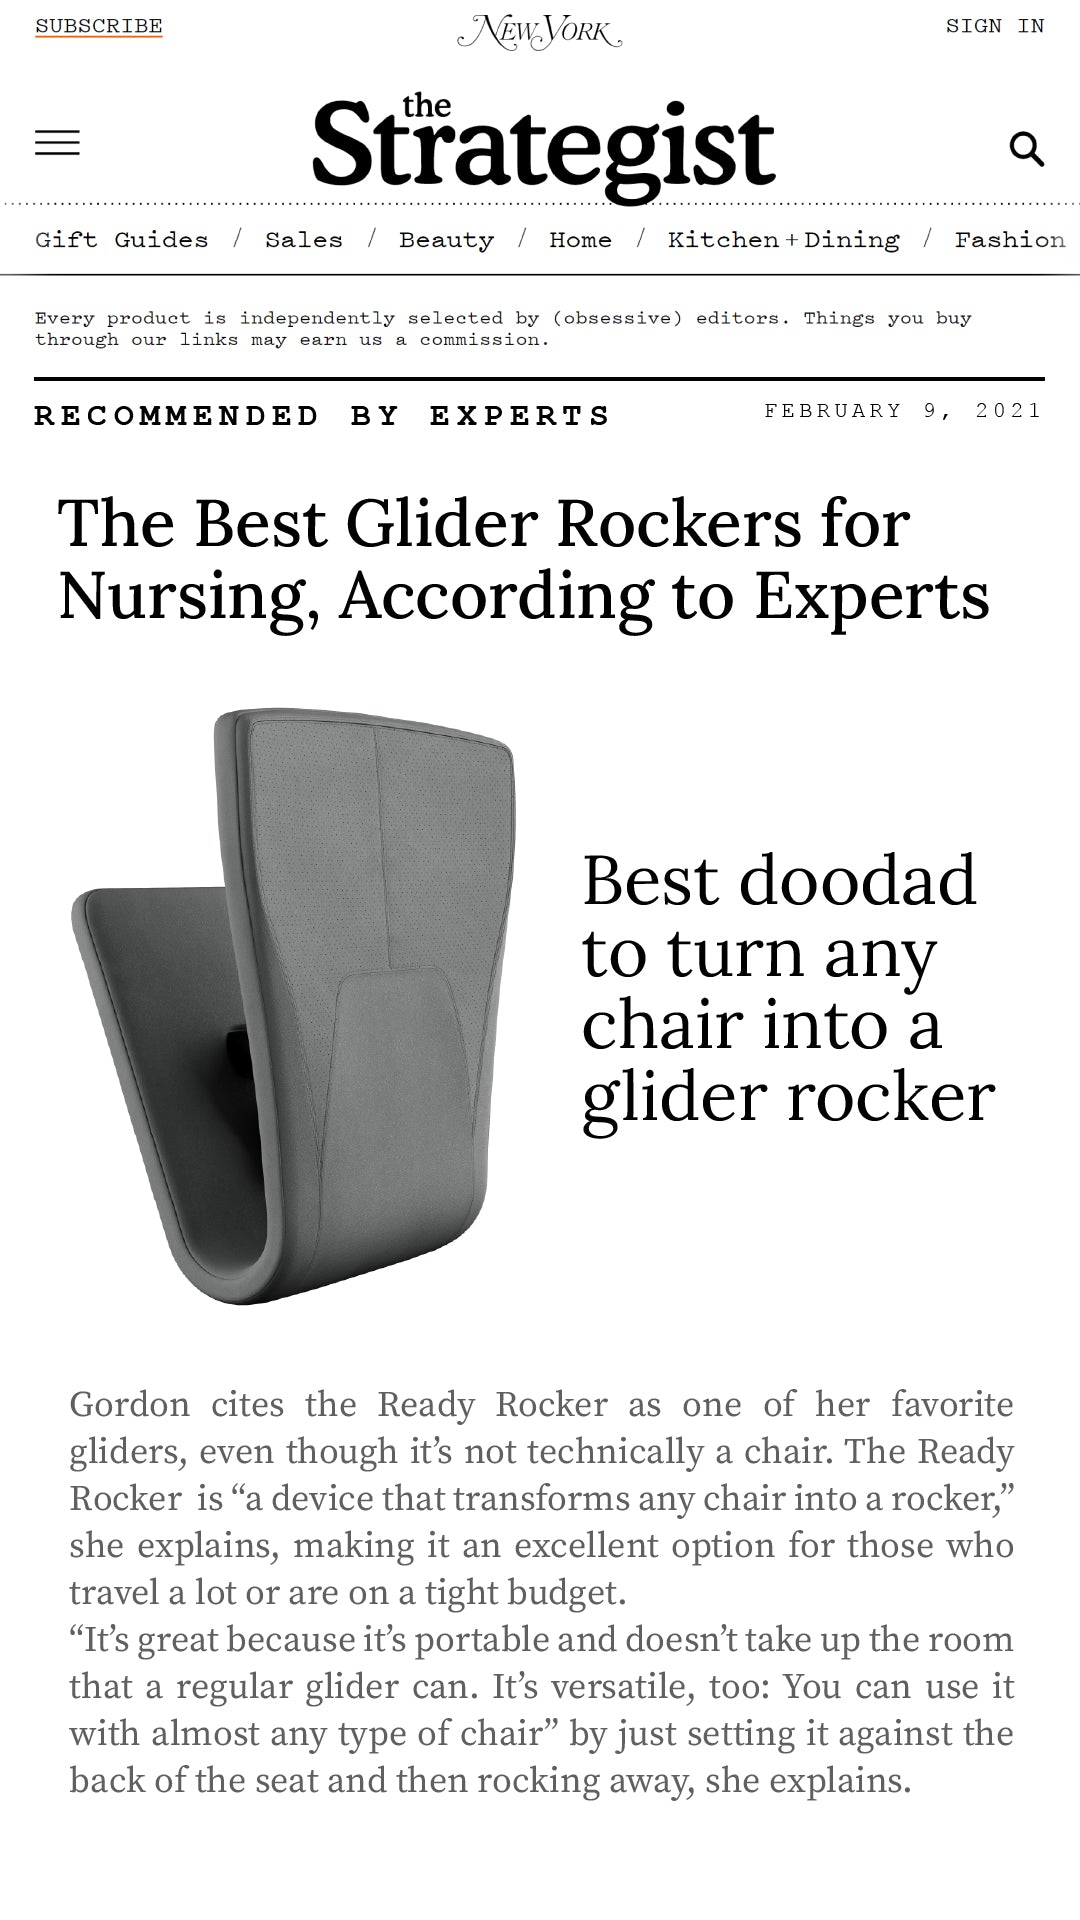 The Best Glider Rockers for Nursing, According to Experts